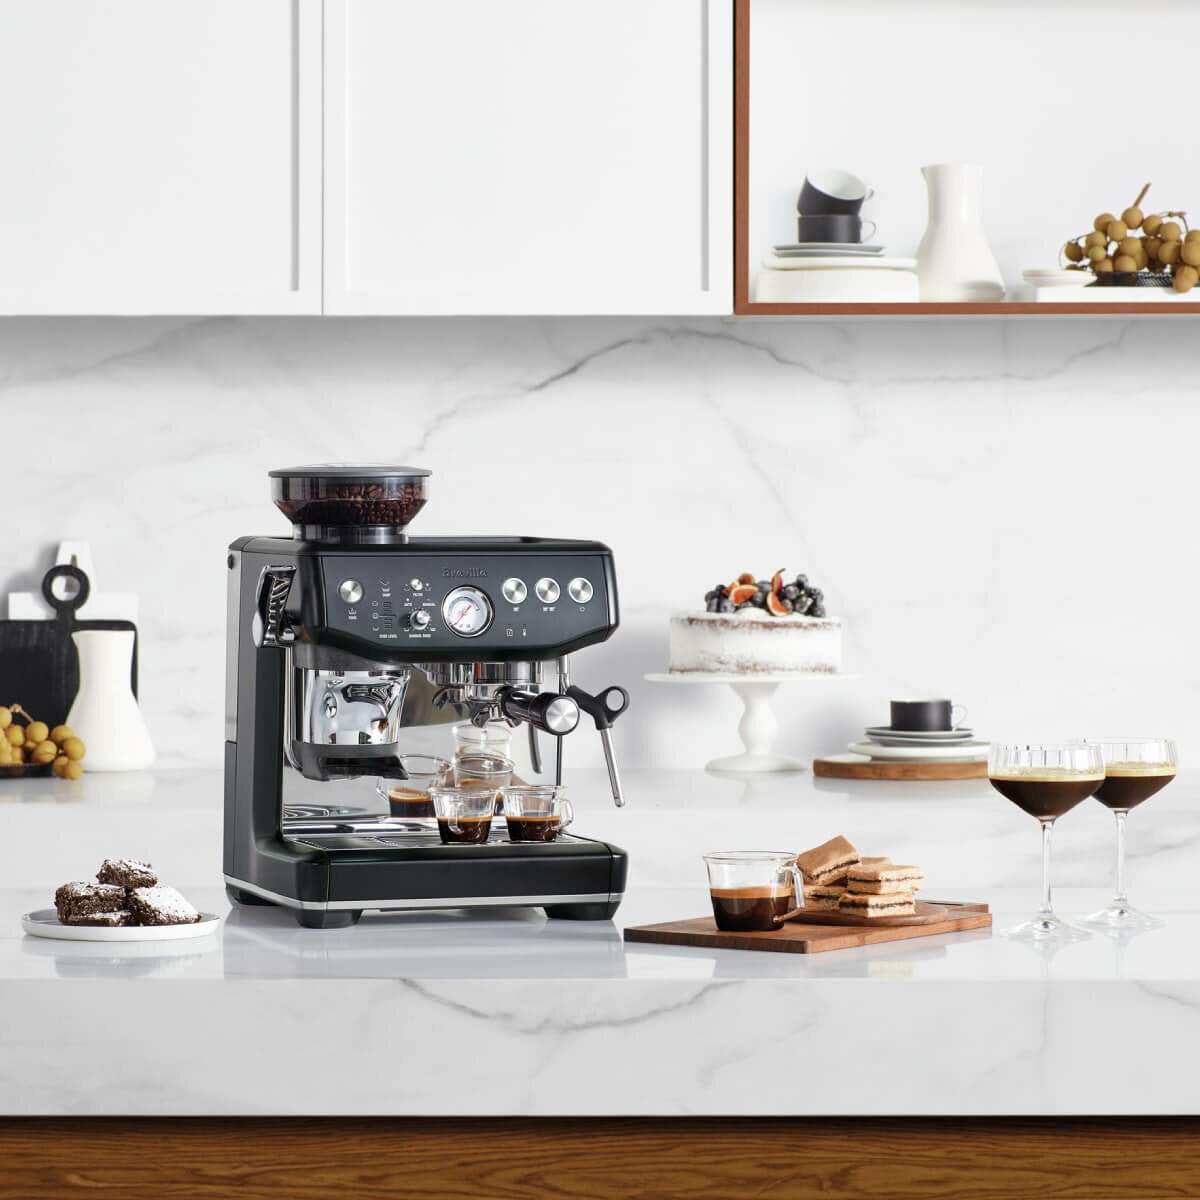 The Breville Barista Express Impress - A New Breville Statement! - Anthony's Espresso